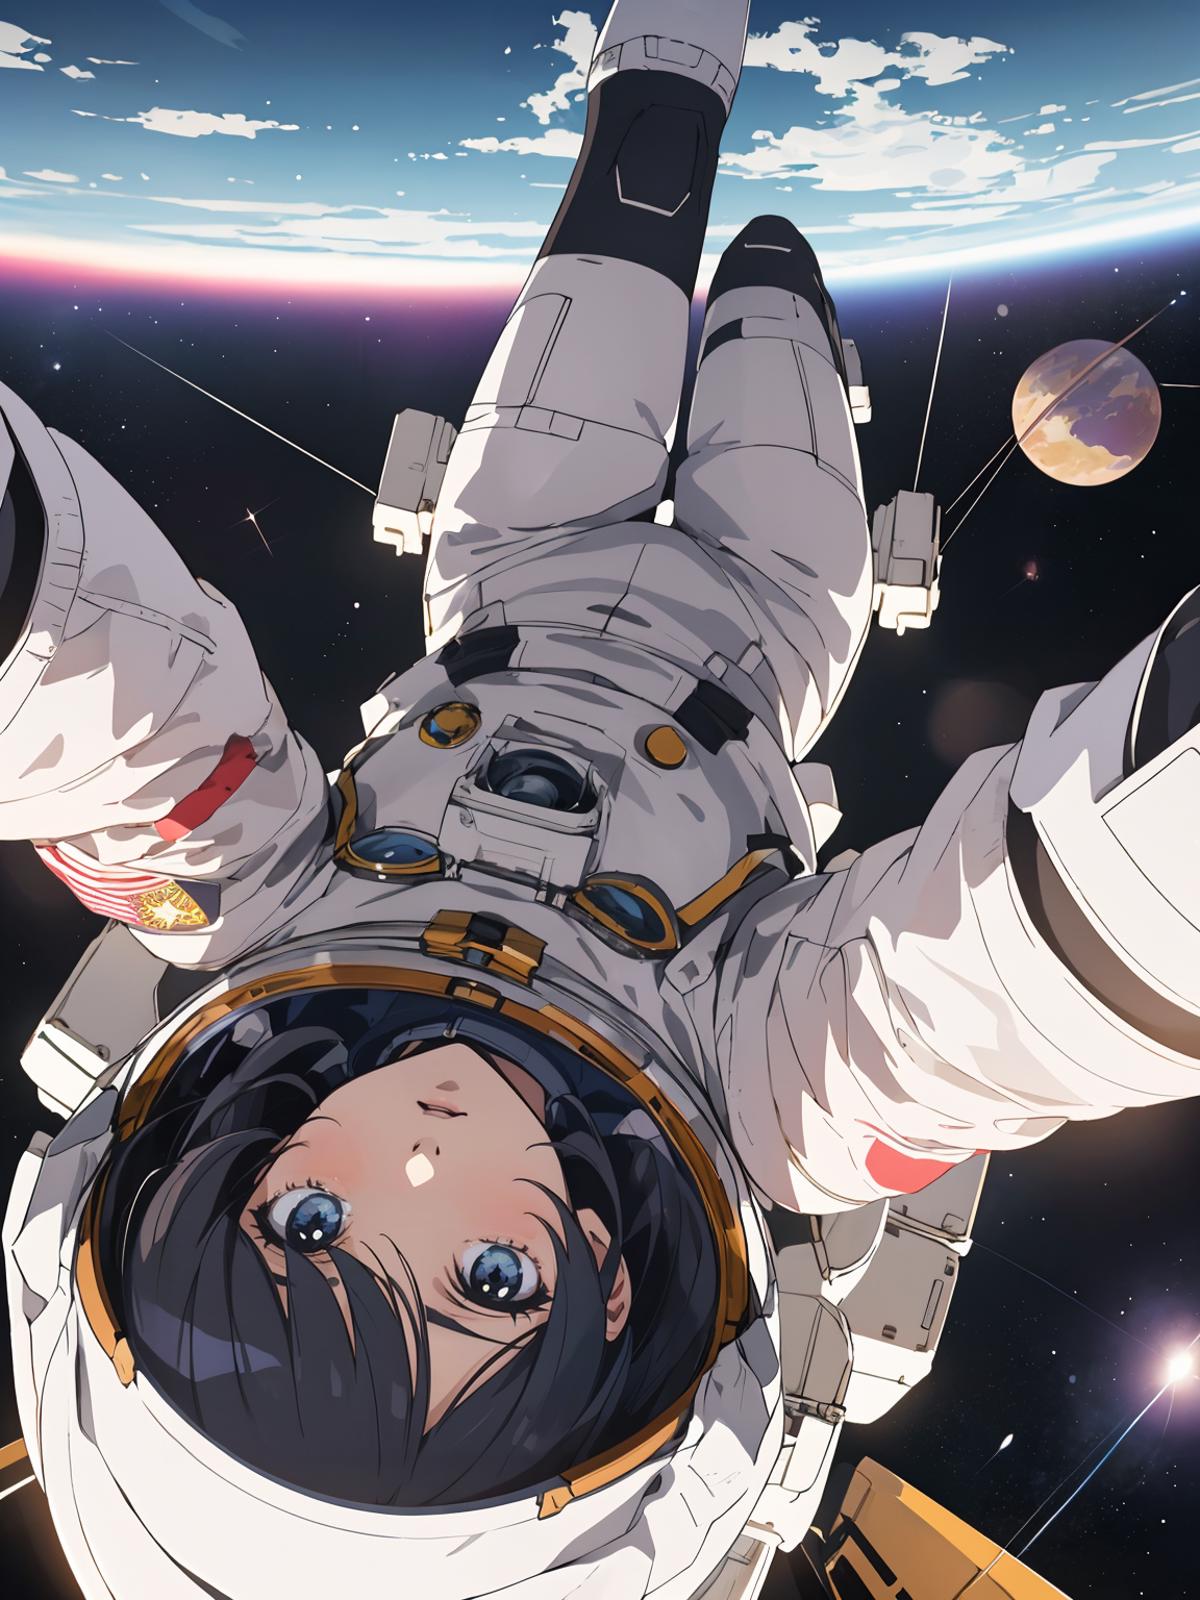 A cartoon image of an astronaut in a white suit with blue eyes, flying in space.